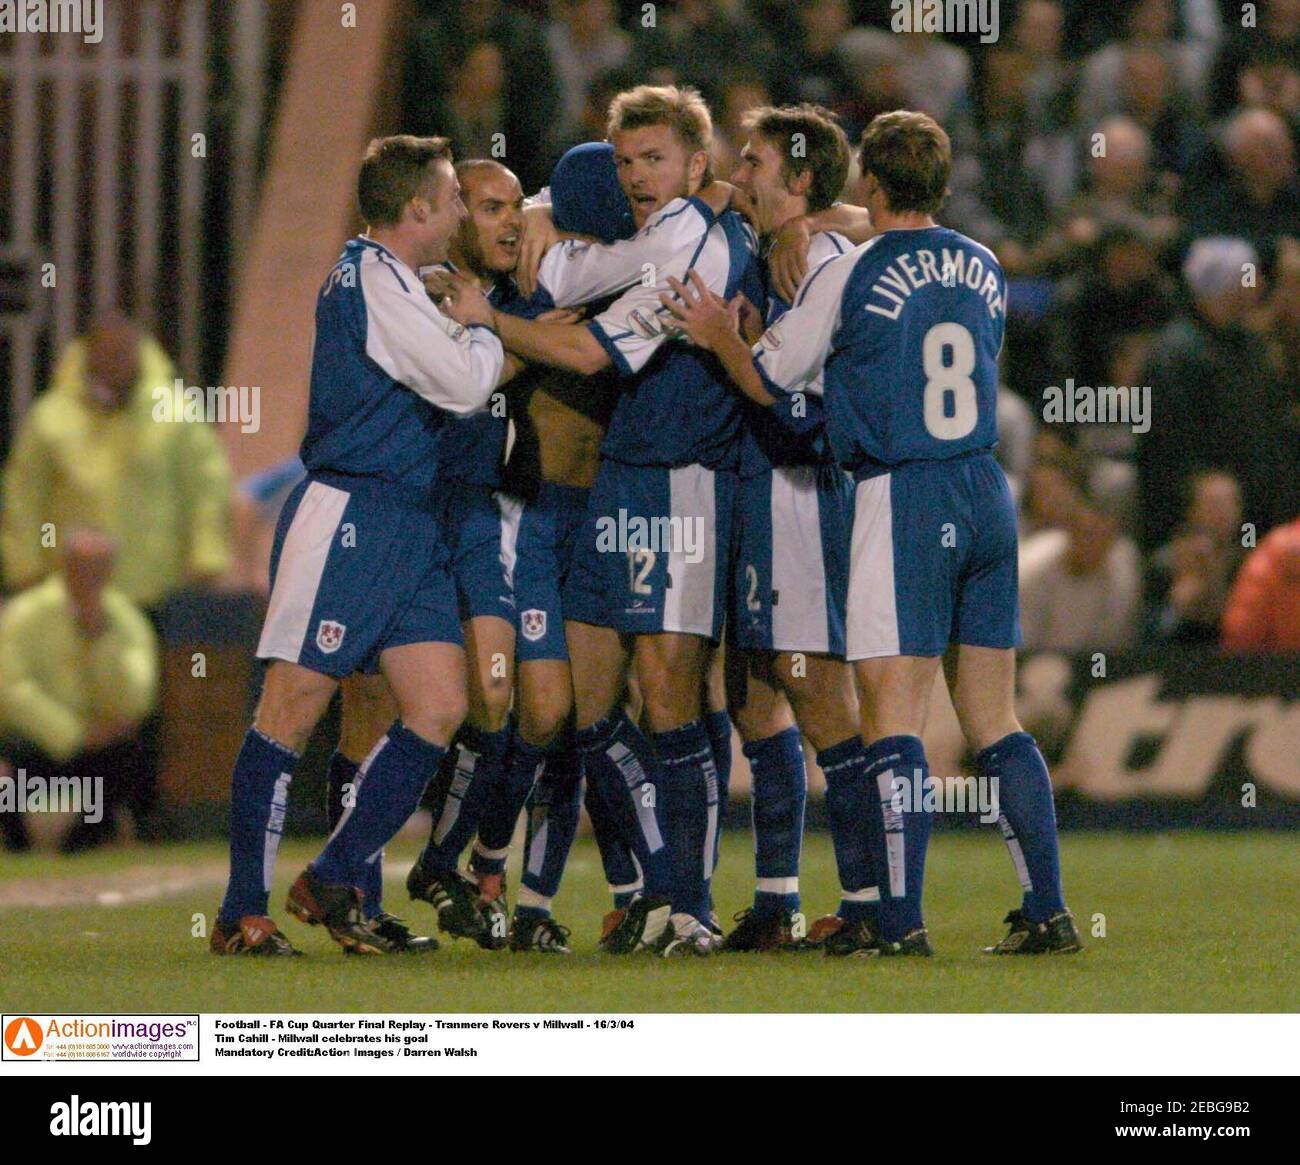 Football - FA Cup Quarter Final Replay - Tranmere Rovers v Millwall -  16/3/04 Tim Cahill - Millwall celebrates his goal Mandatory Credit:Action  Images / Darren Walsh Stock Photo - Alamy